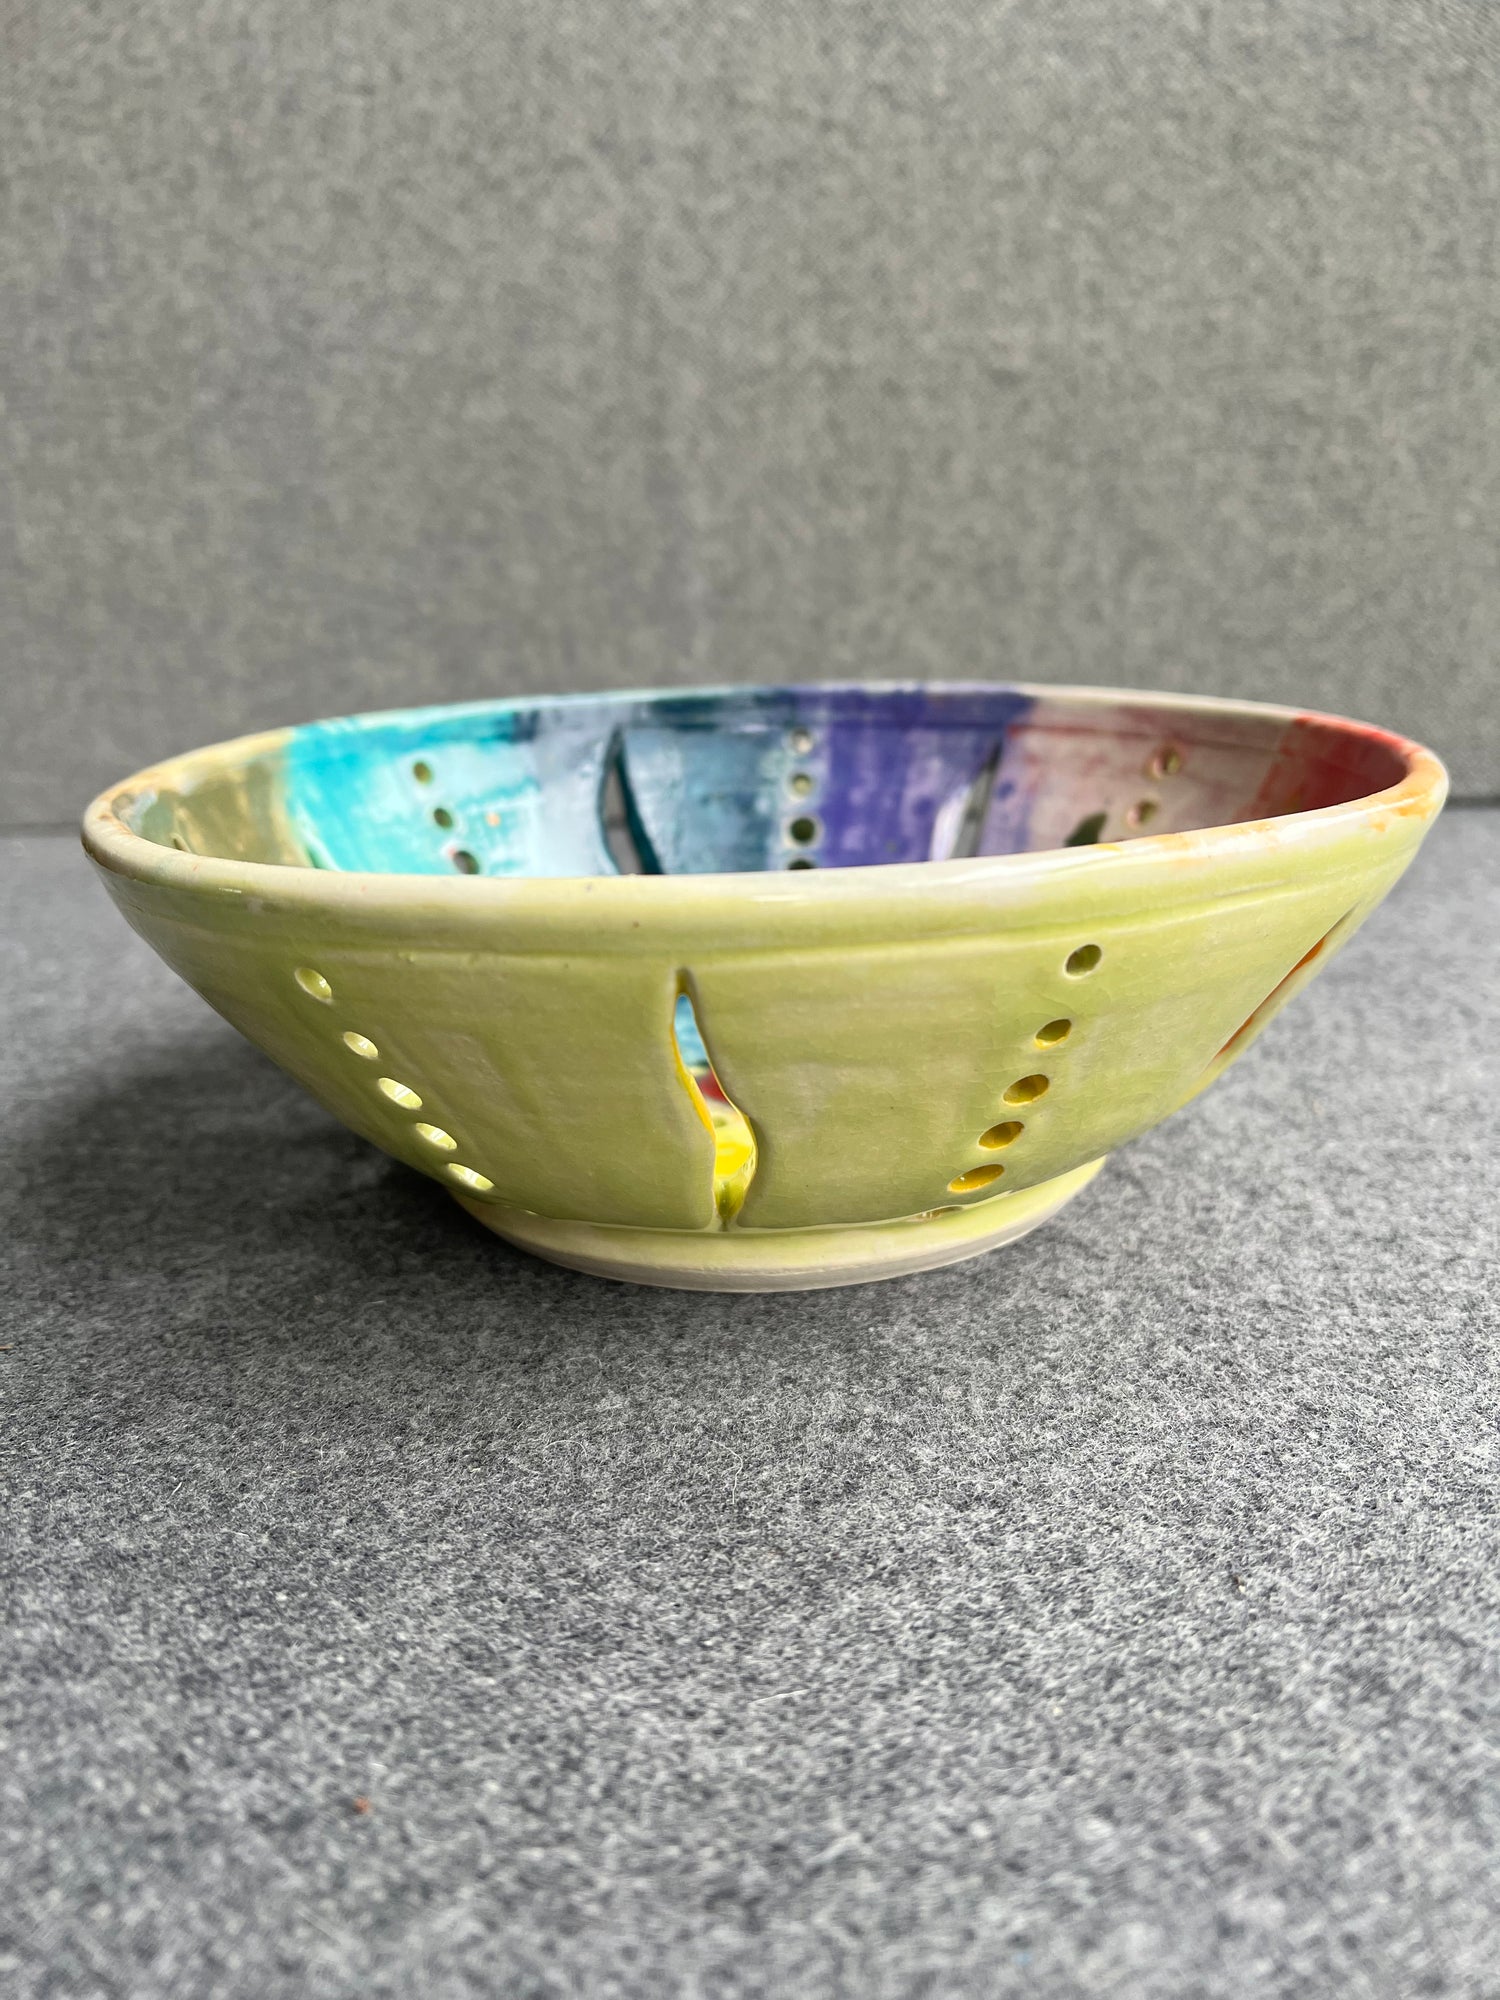 A side view of an intricately pierced bowl with a color wheel effect rainbow pattern and a small red heart in the center of the bowl sits in front of a grey background. The outside of the bowl is chartreuse green. 